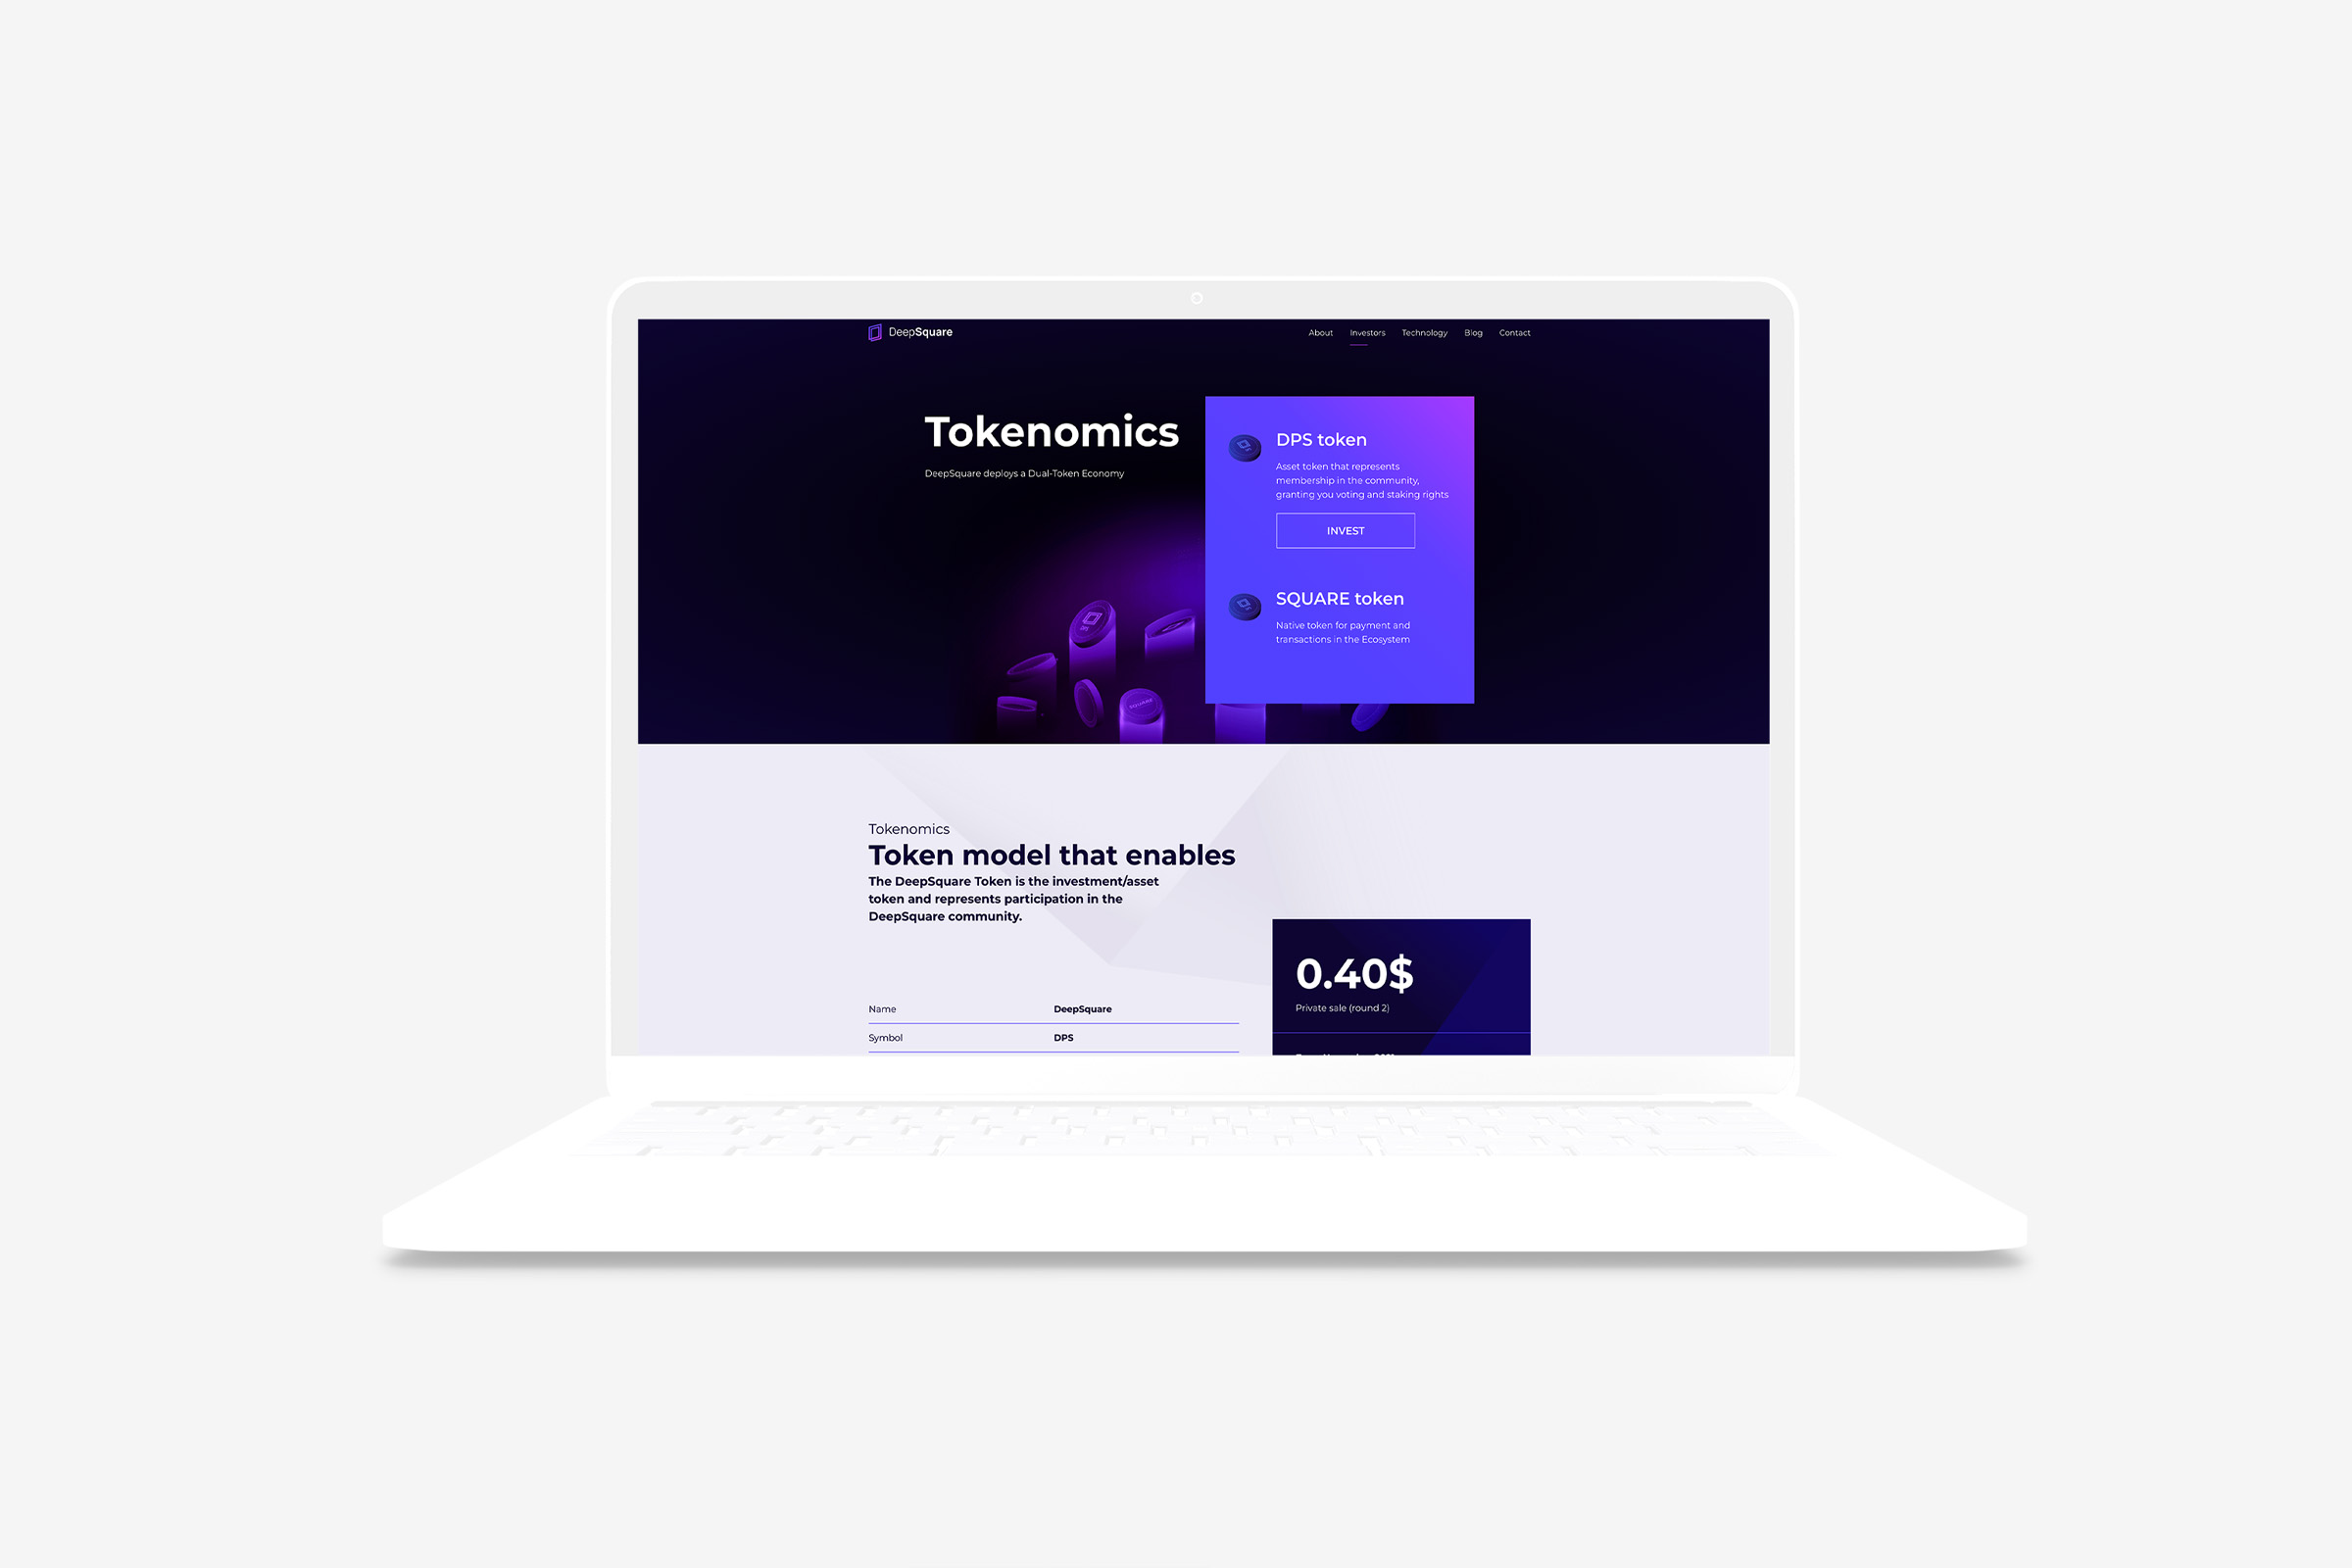 Modern and functional web design customized for the needs of the crypto community